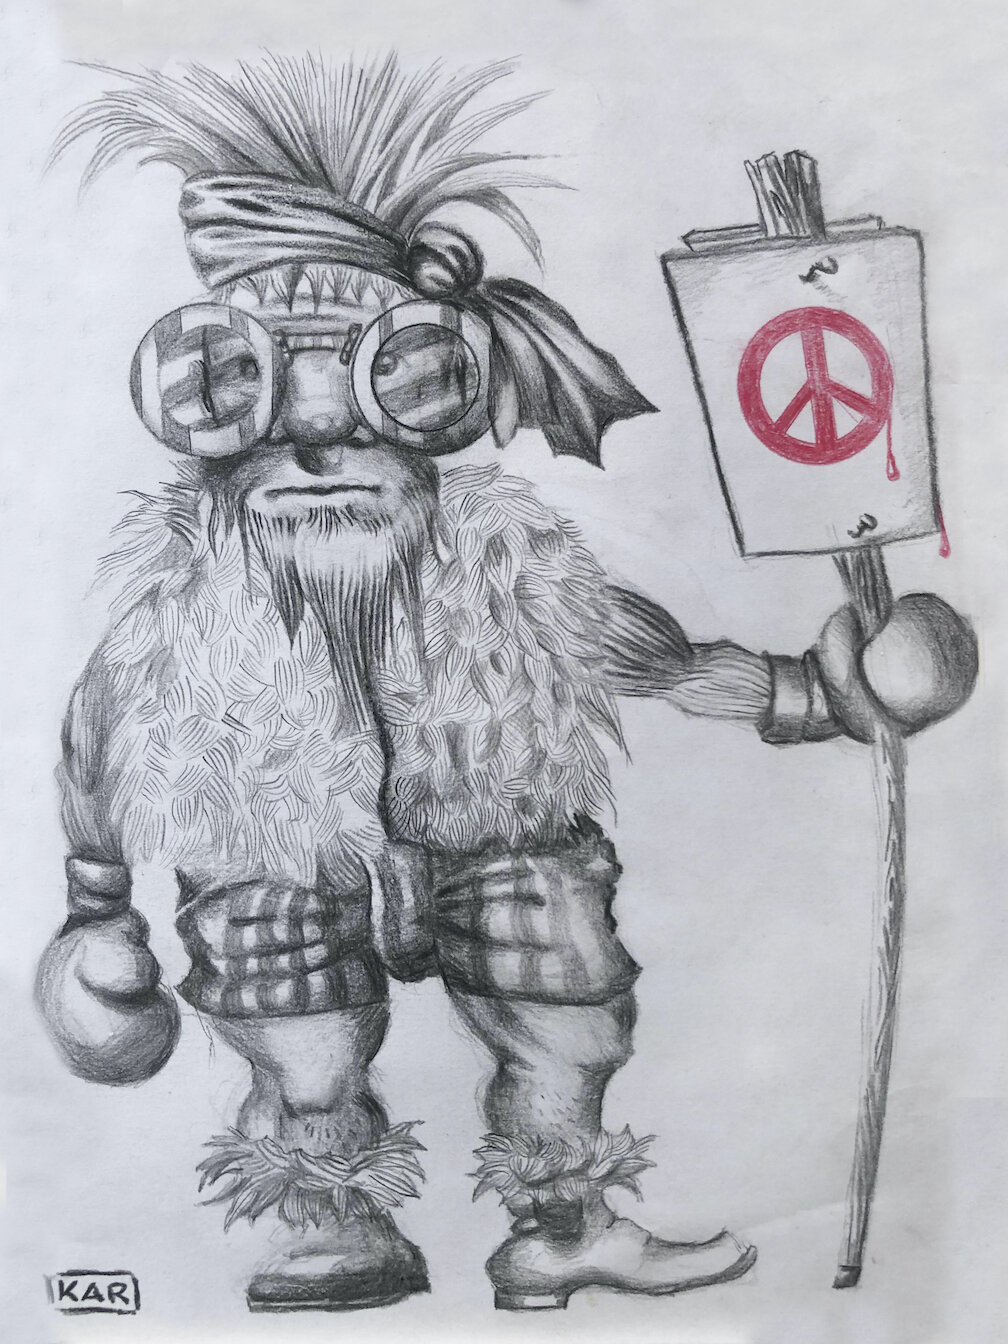    The Missing Peace  , pencil on paper, 8” x 6” 